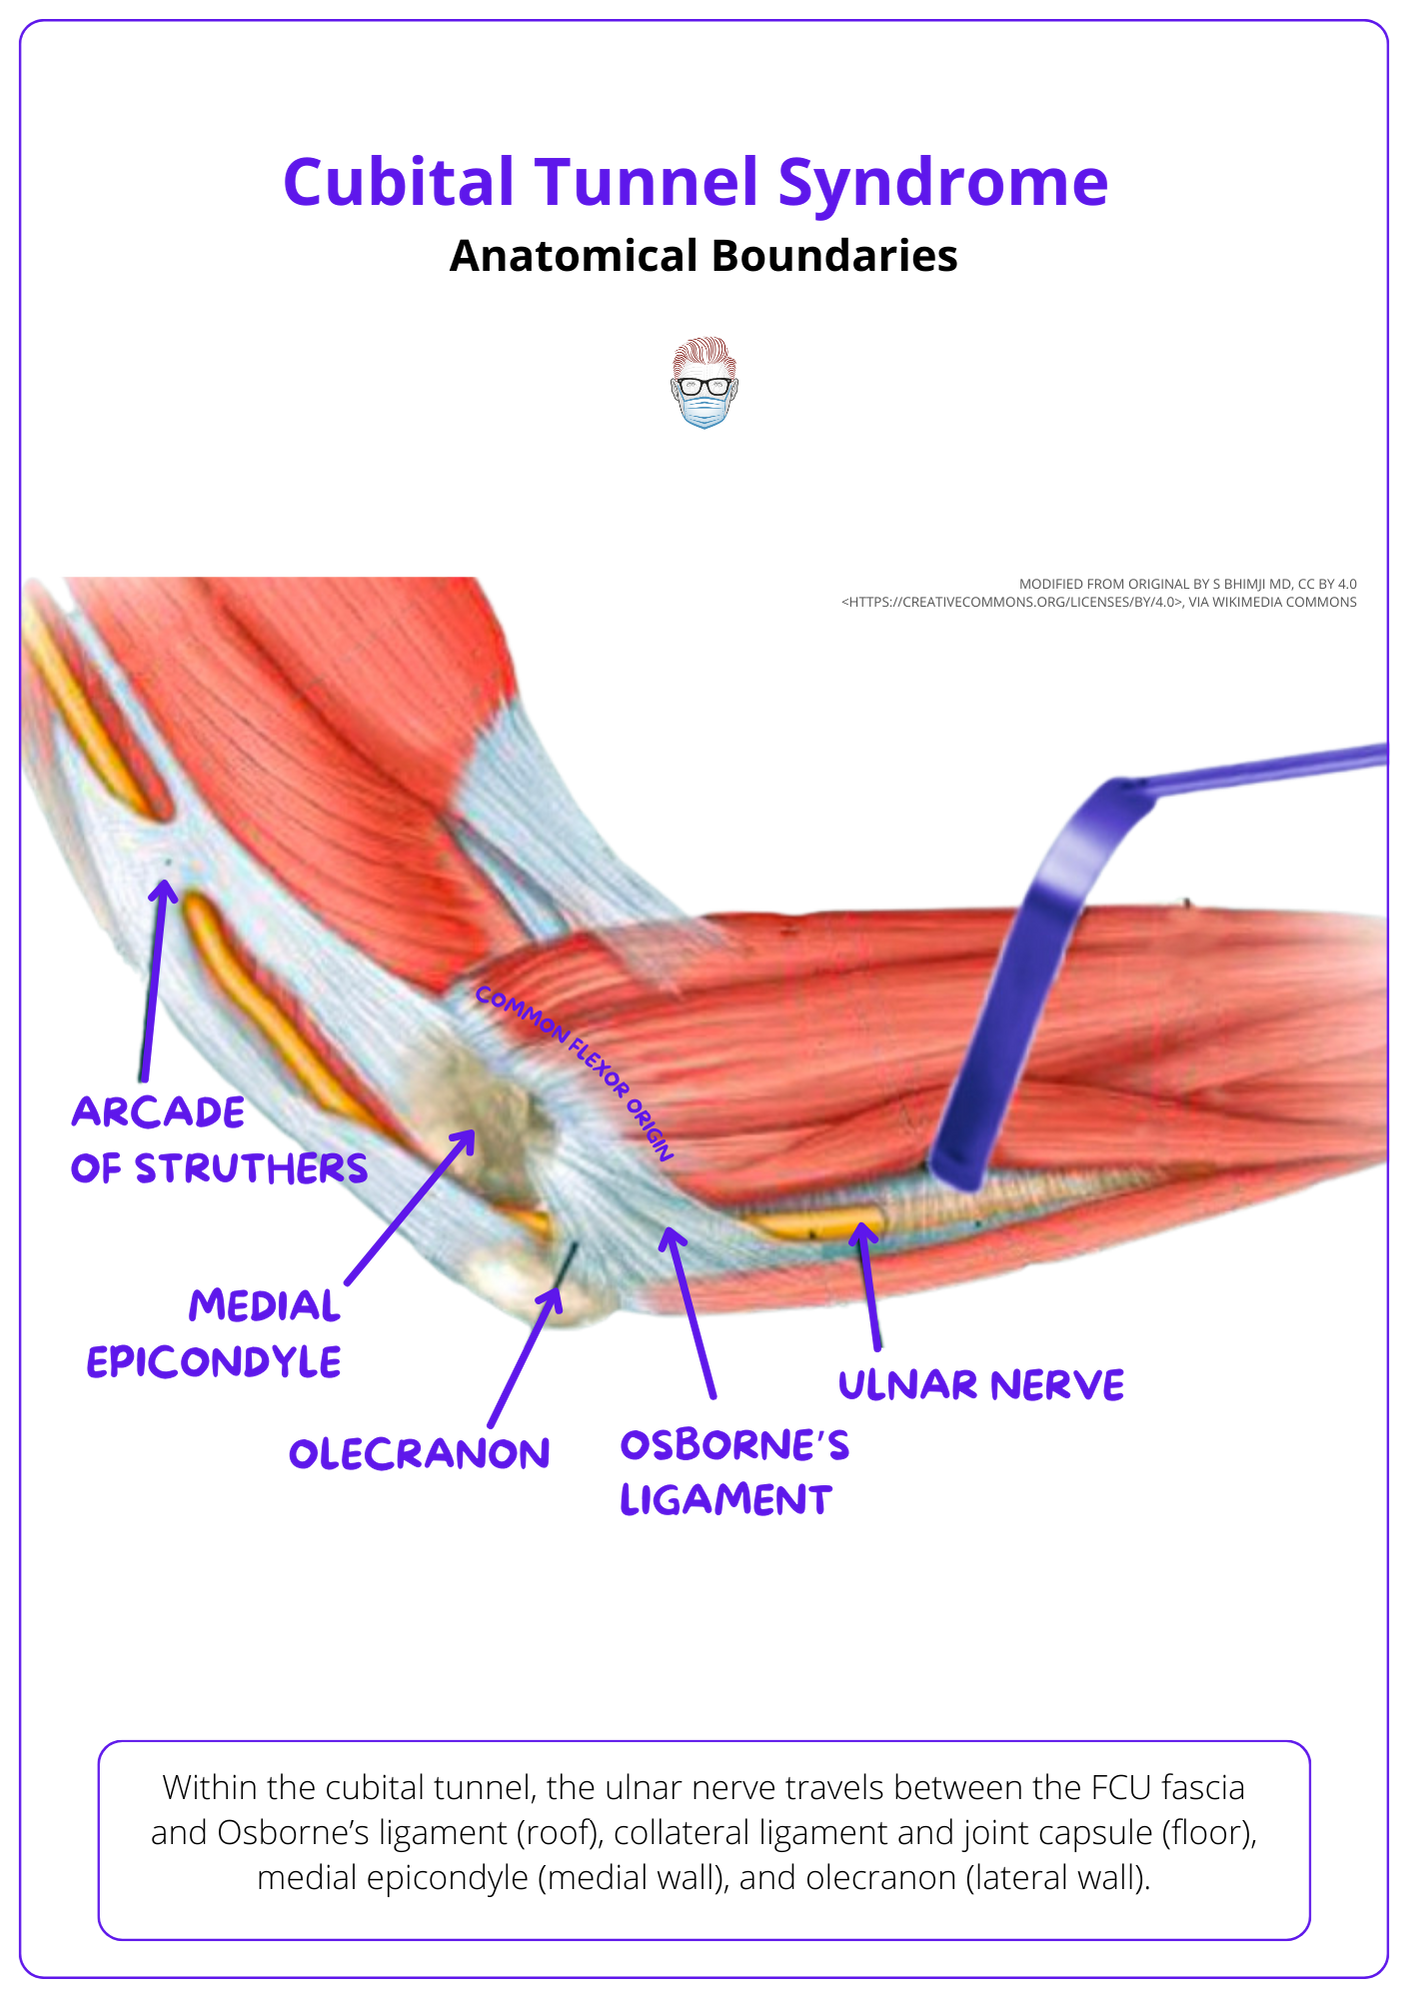 This image shows the Anatomical Boundaries of the Cubital Tunnel.